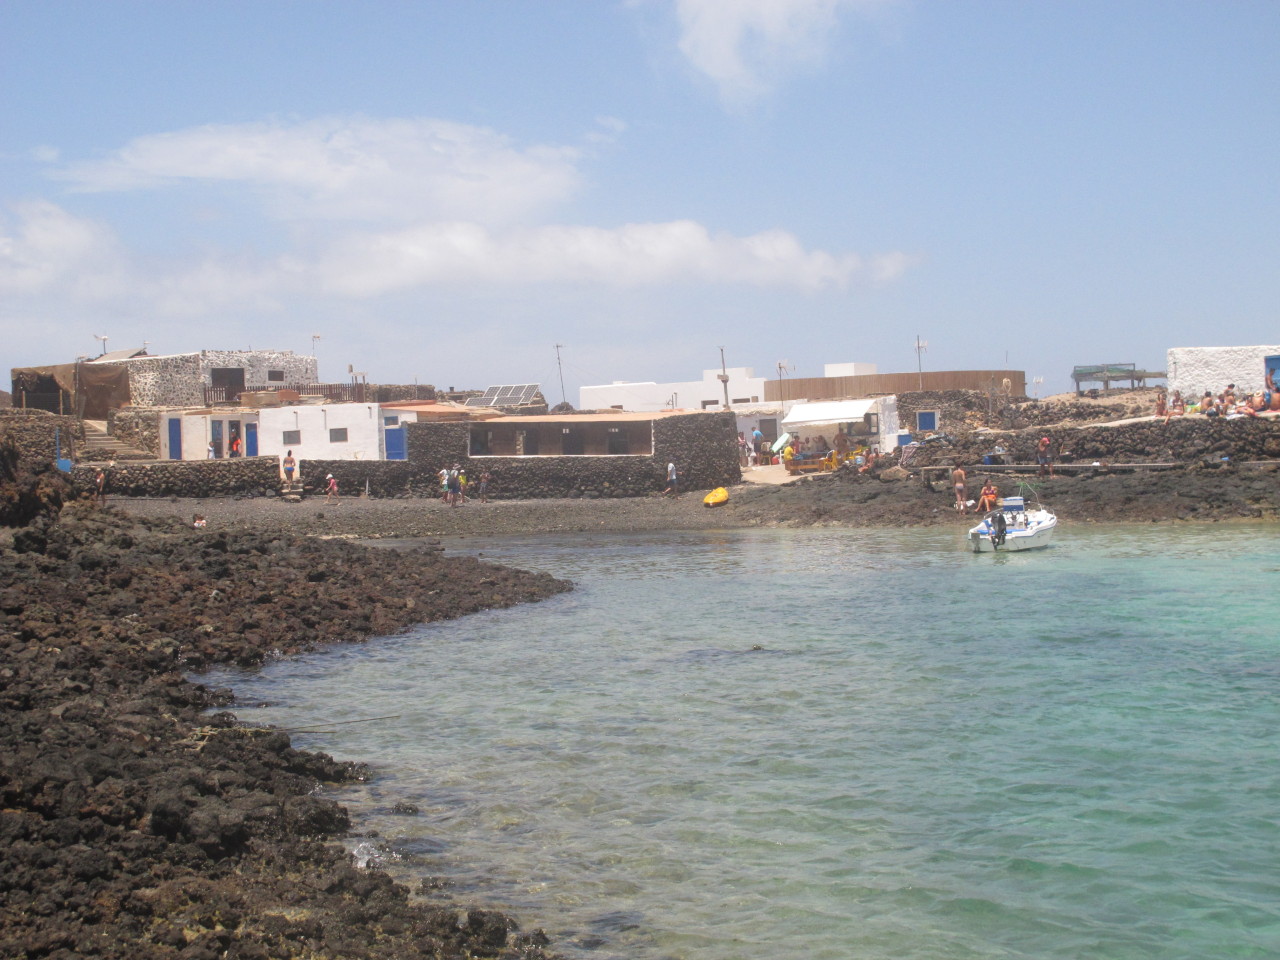 The only houses in Lobos Island